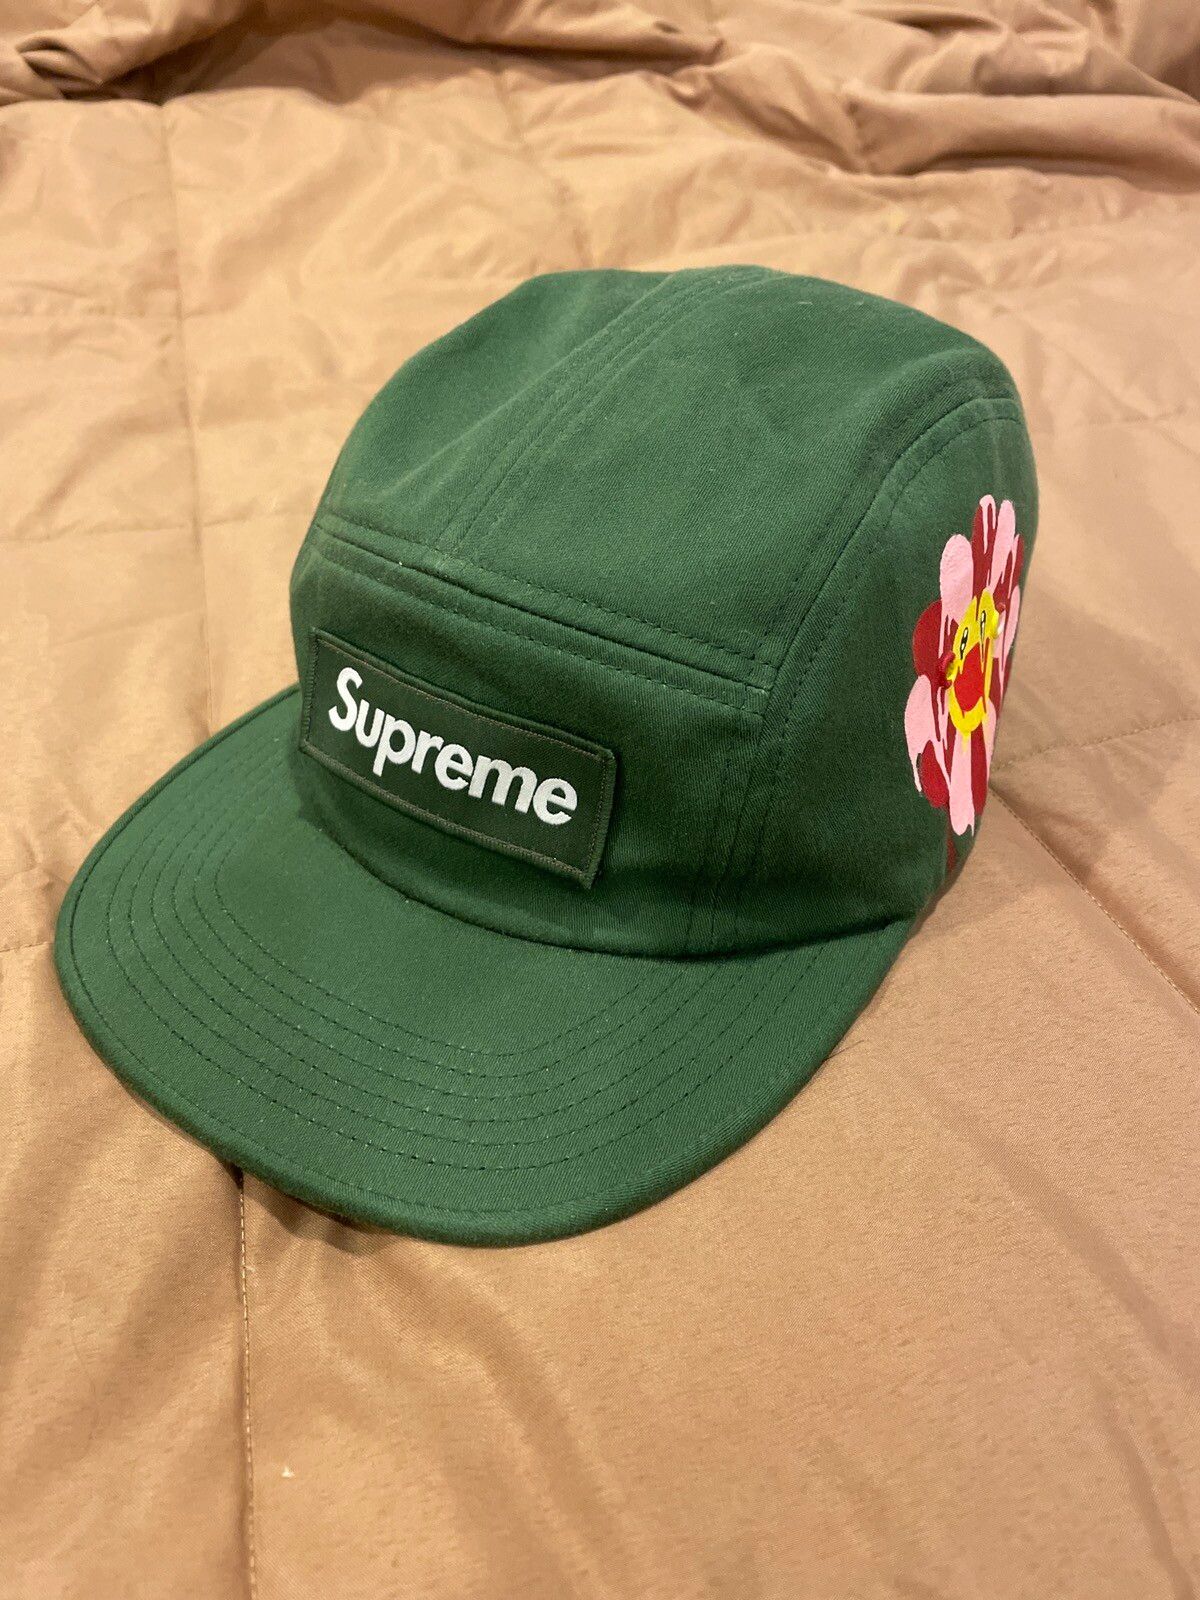 Supreme Supreme Camp Cap x Takashi Murakami Painted Size ONE SIZE - 1 Preview